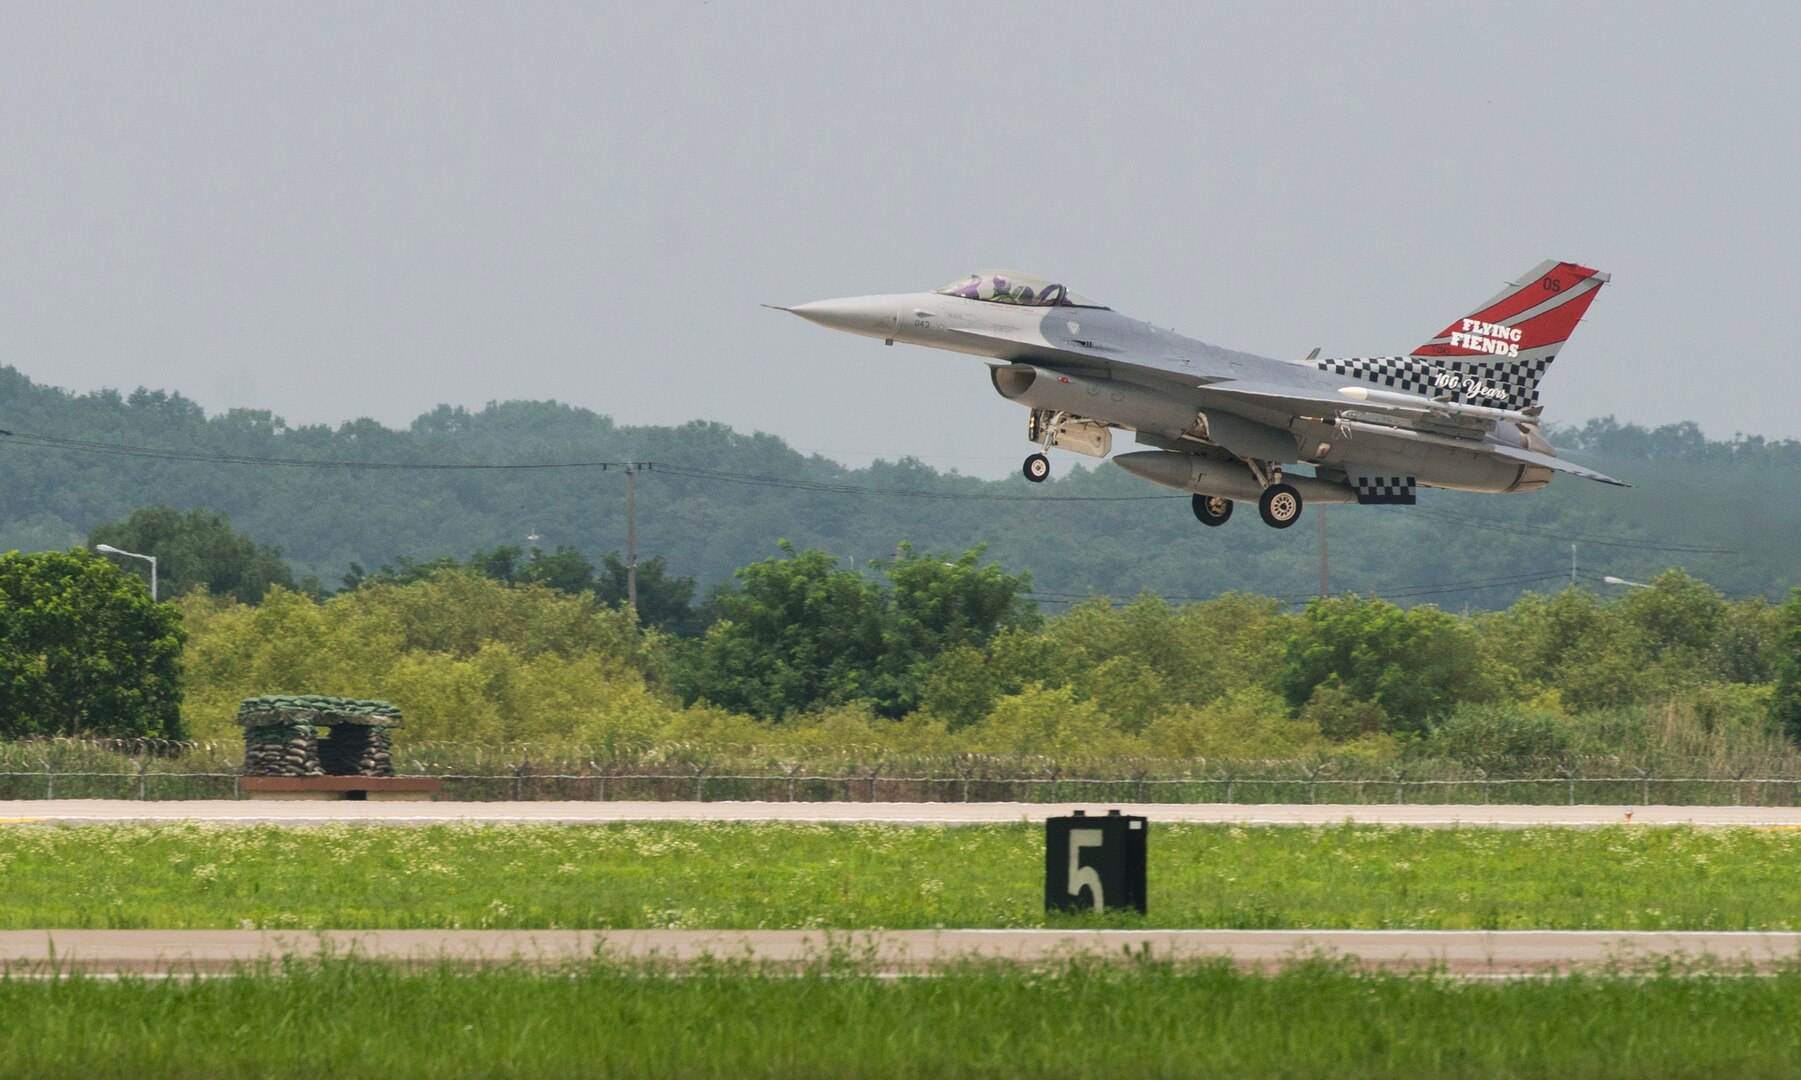 The 36th Fight Squadron Flying Fiends centennial F-16 Fighting Falcon takes off from Osan Air Base, Republic of Korea, July 19, 2017. U.S. Air Force Col. Andrew P. Hansen, 51st Fighter Wing commander, flew the freshly painted jet for the first time during his final flight at Osan. (U.S. Air Force photo by Staff Sgt. Alex Fox Echols III)